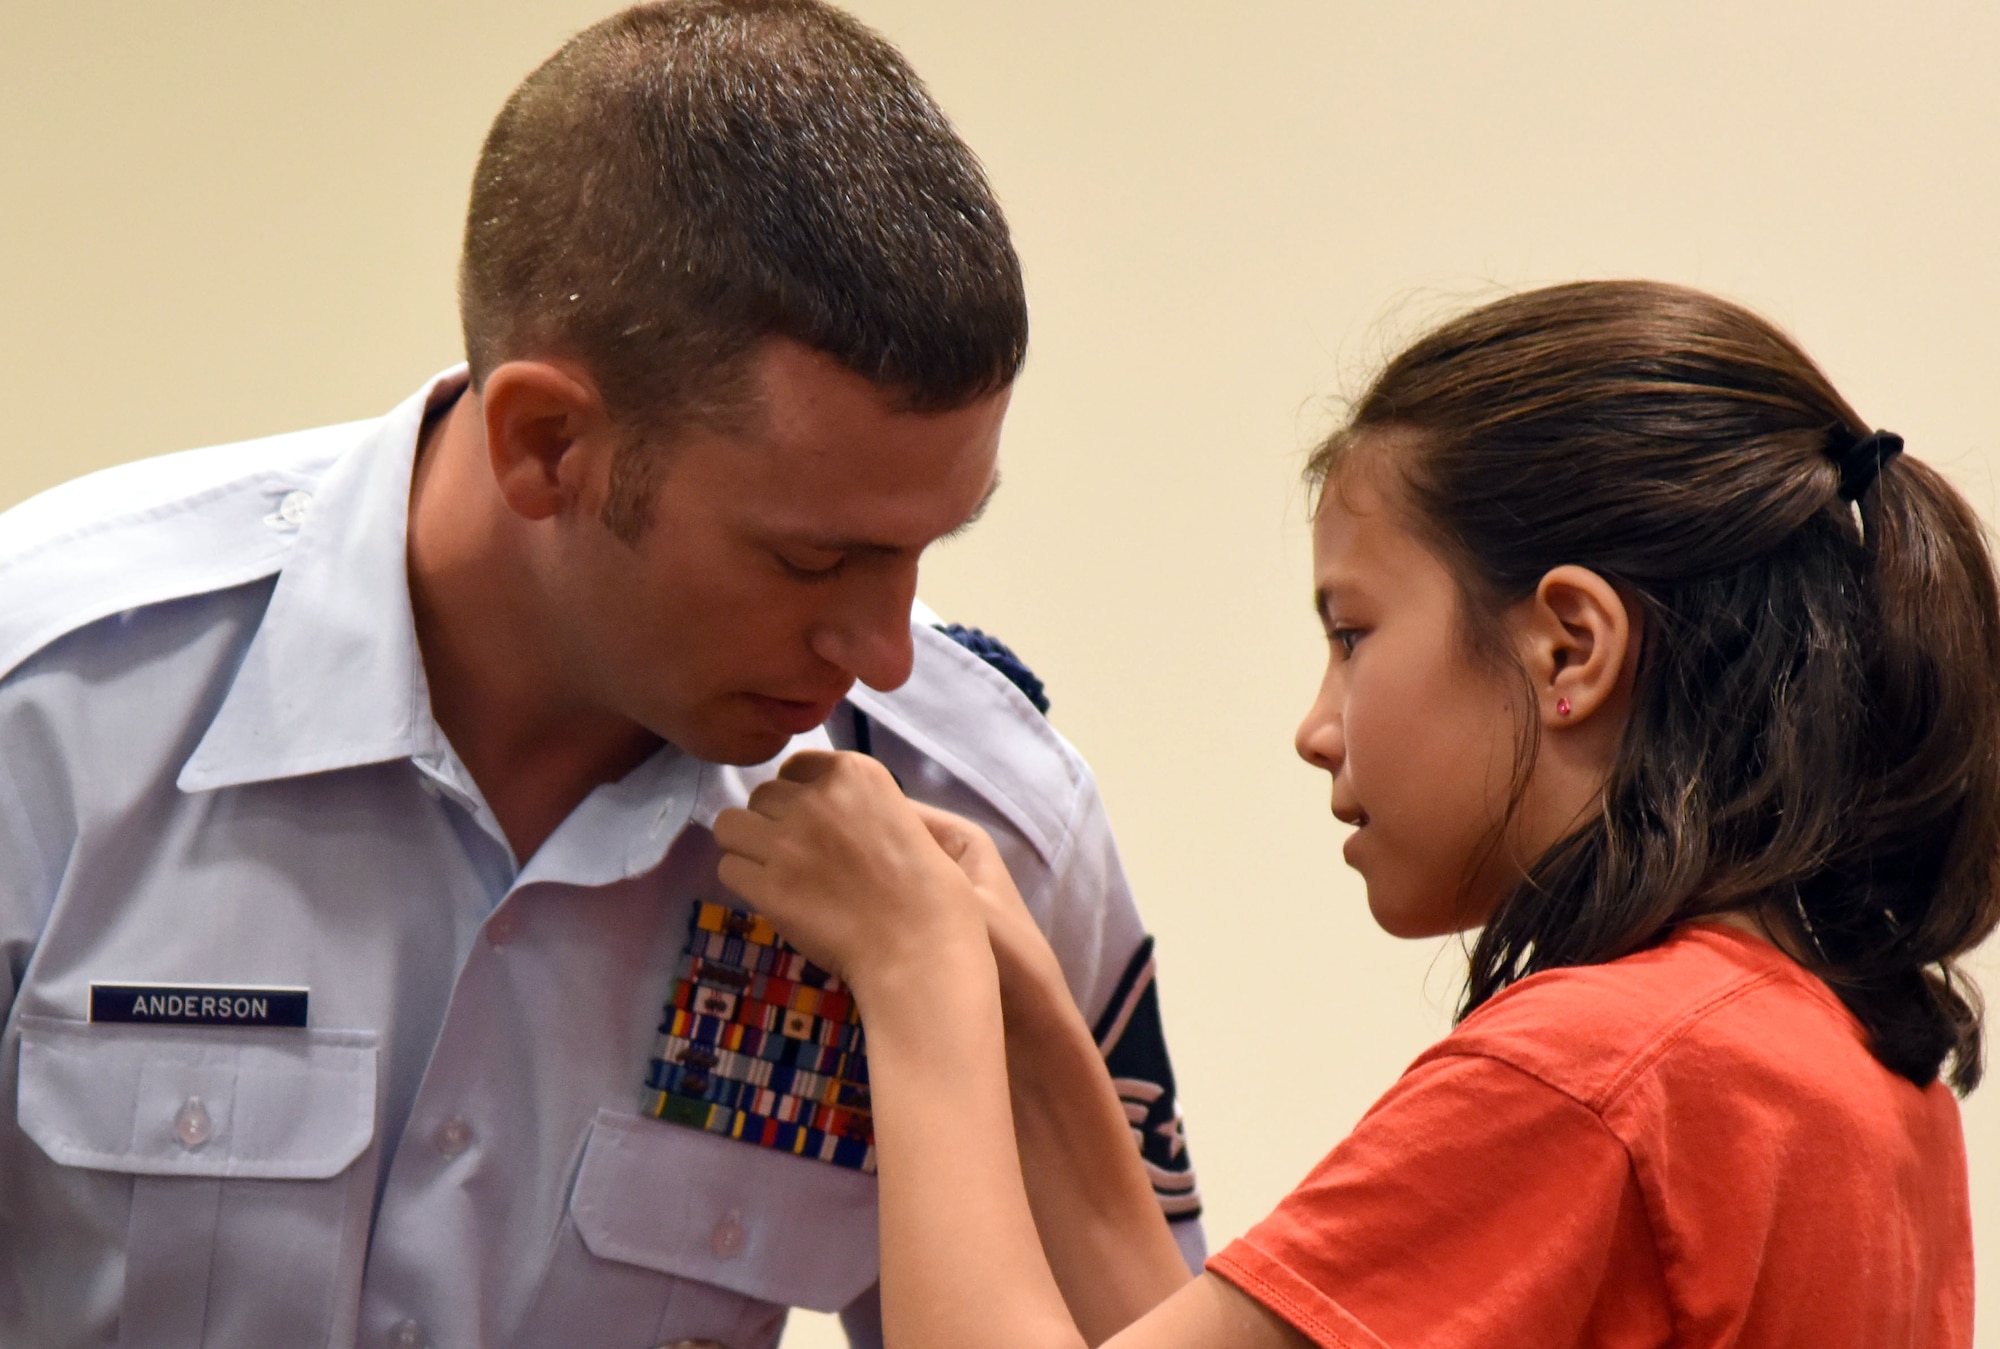 Master Sgt. Joshua Anderson, 81st Training Support Squadron Military Training Leader School instructor supervisor, is pinned on by his daughter, Caitlyn, during the Center for Naval Aviation Technical Training Unit Keesler Chief Petty Officer Pinning Ceremony at the Roberts Consolidated Aircraft Maintenance Facility Sept. 1, 2017, on Keesler Air Force Base, Mississippi. The six-week long Navy Chief Petty Officer Courses held at Keesler and the Naval Construction Battalion Center in Gulfport, Mississippi included four Air Force members, which is the first time Keesler Air Force members have gone through this process. The course is meant to enhance leadership skills and to strengthen the Navy-Air Force enlisted leadership relationship on Keesler. (U.S. Air Force photo by Kemberly Groue)